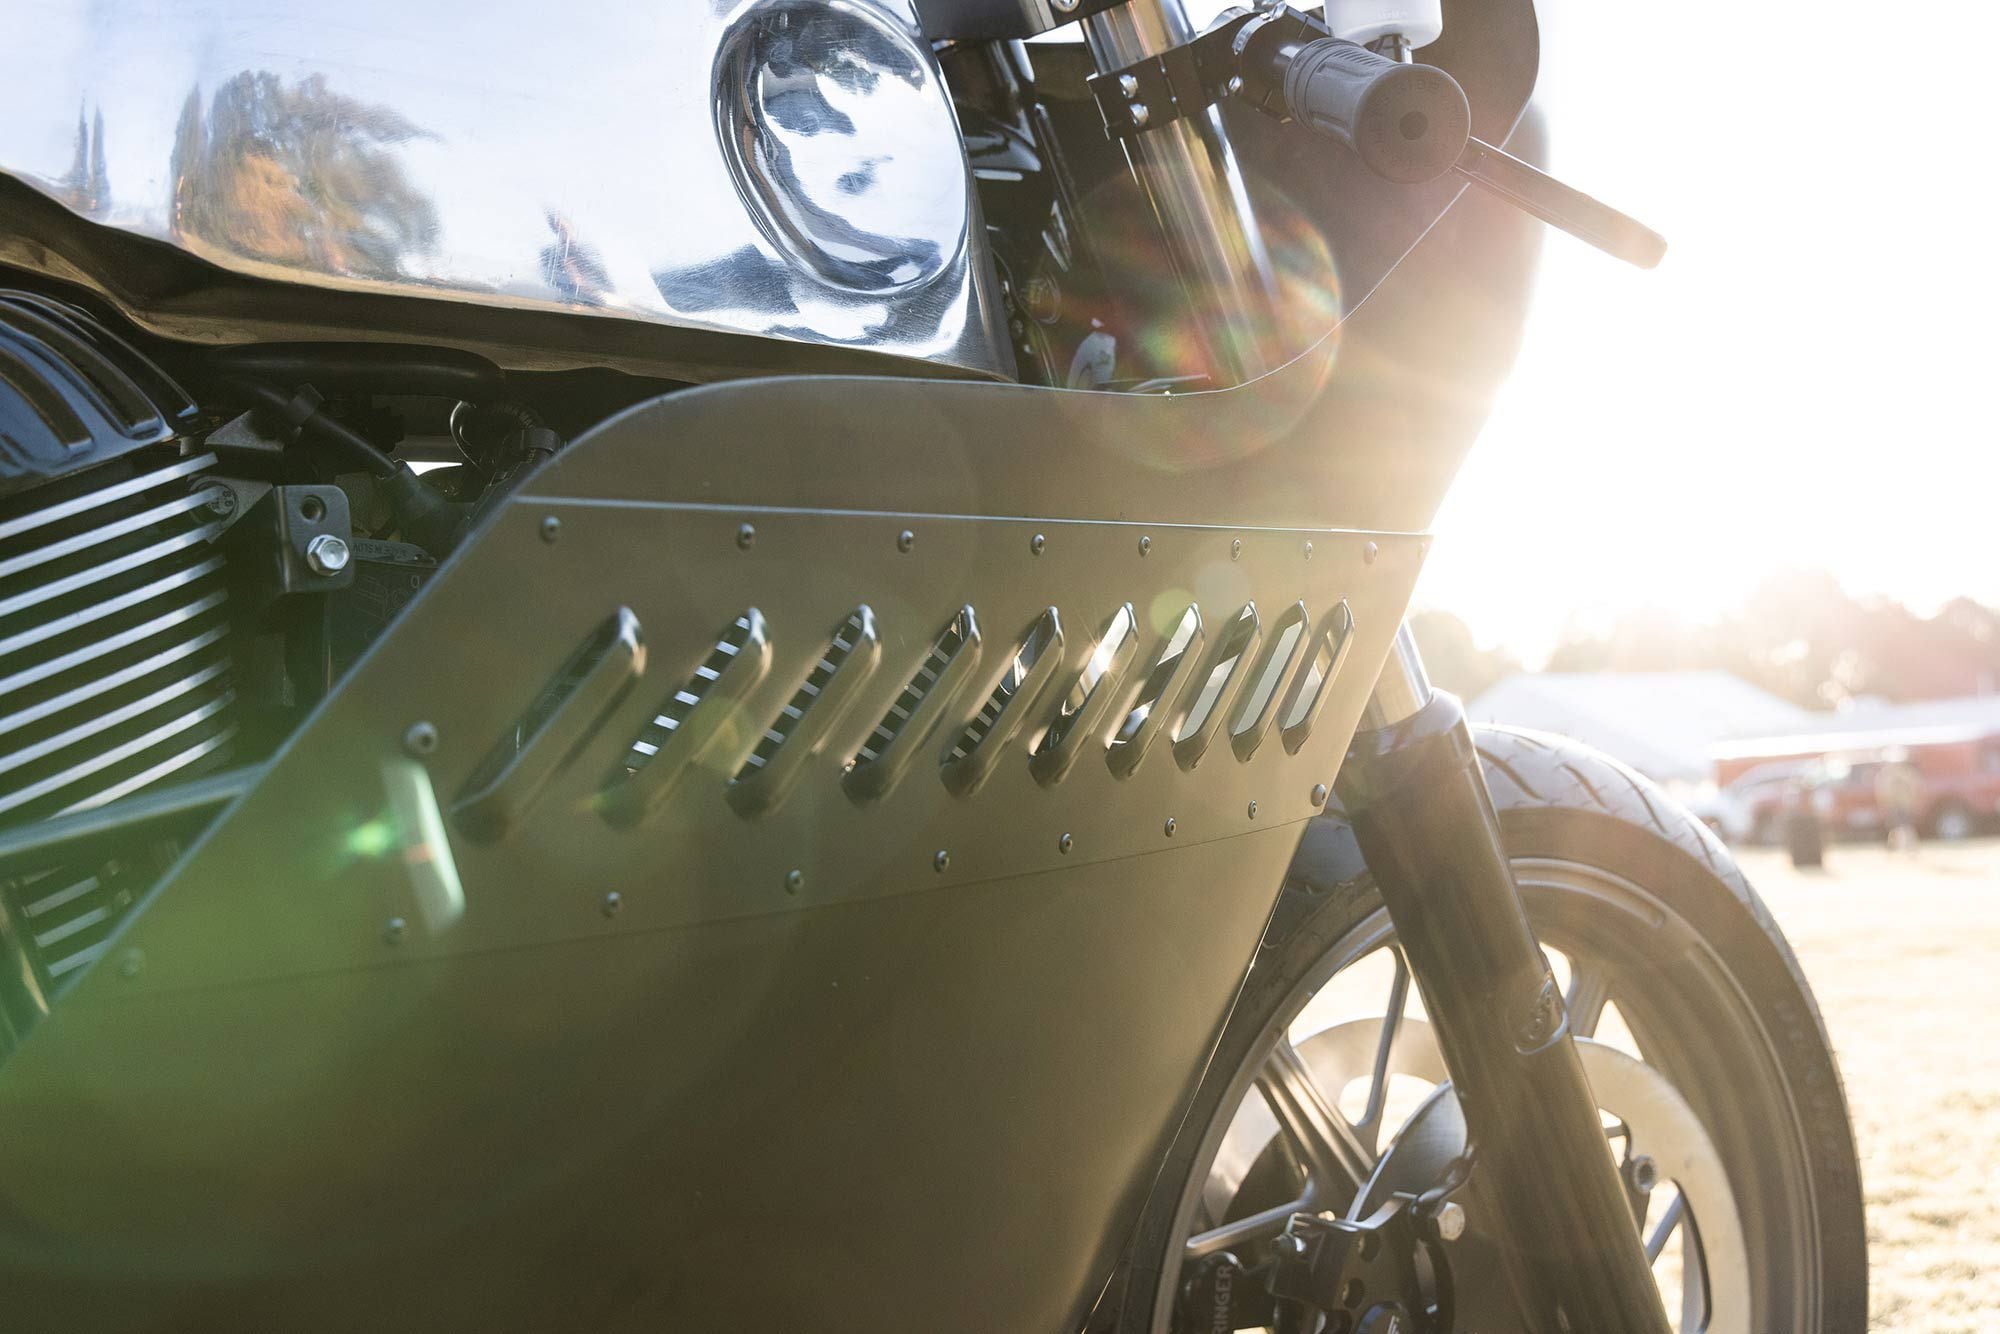 Louvers cut into the ’70s fairing on the ZH x NC custom Indian Chief.